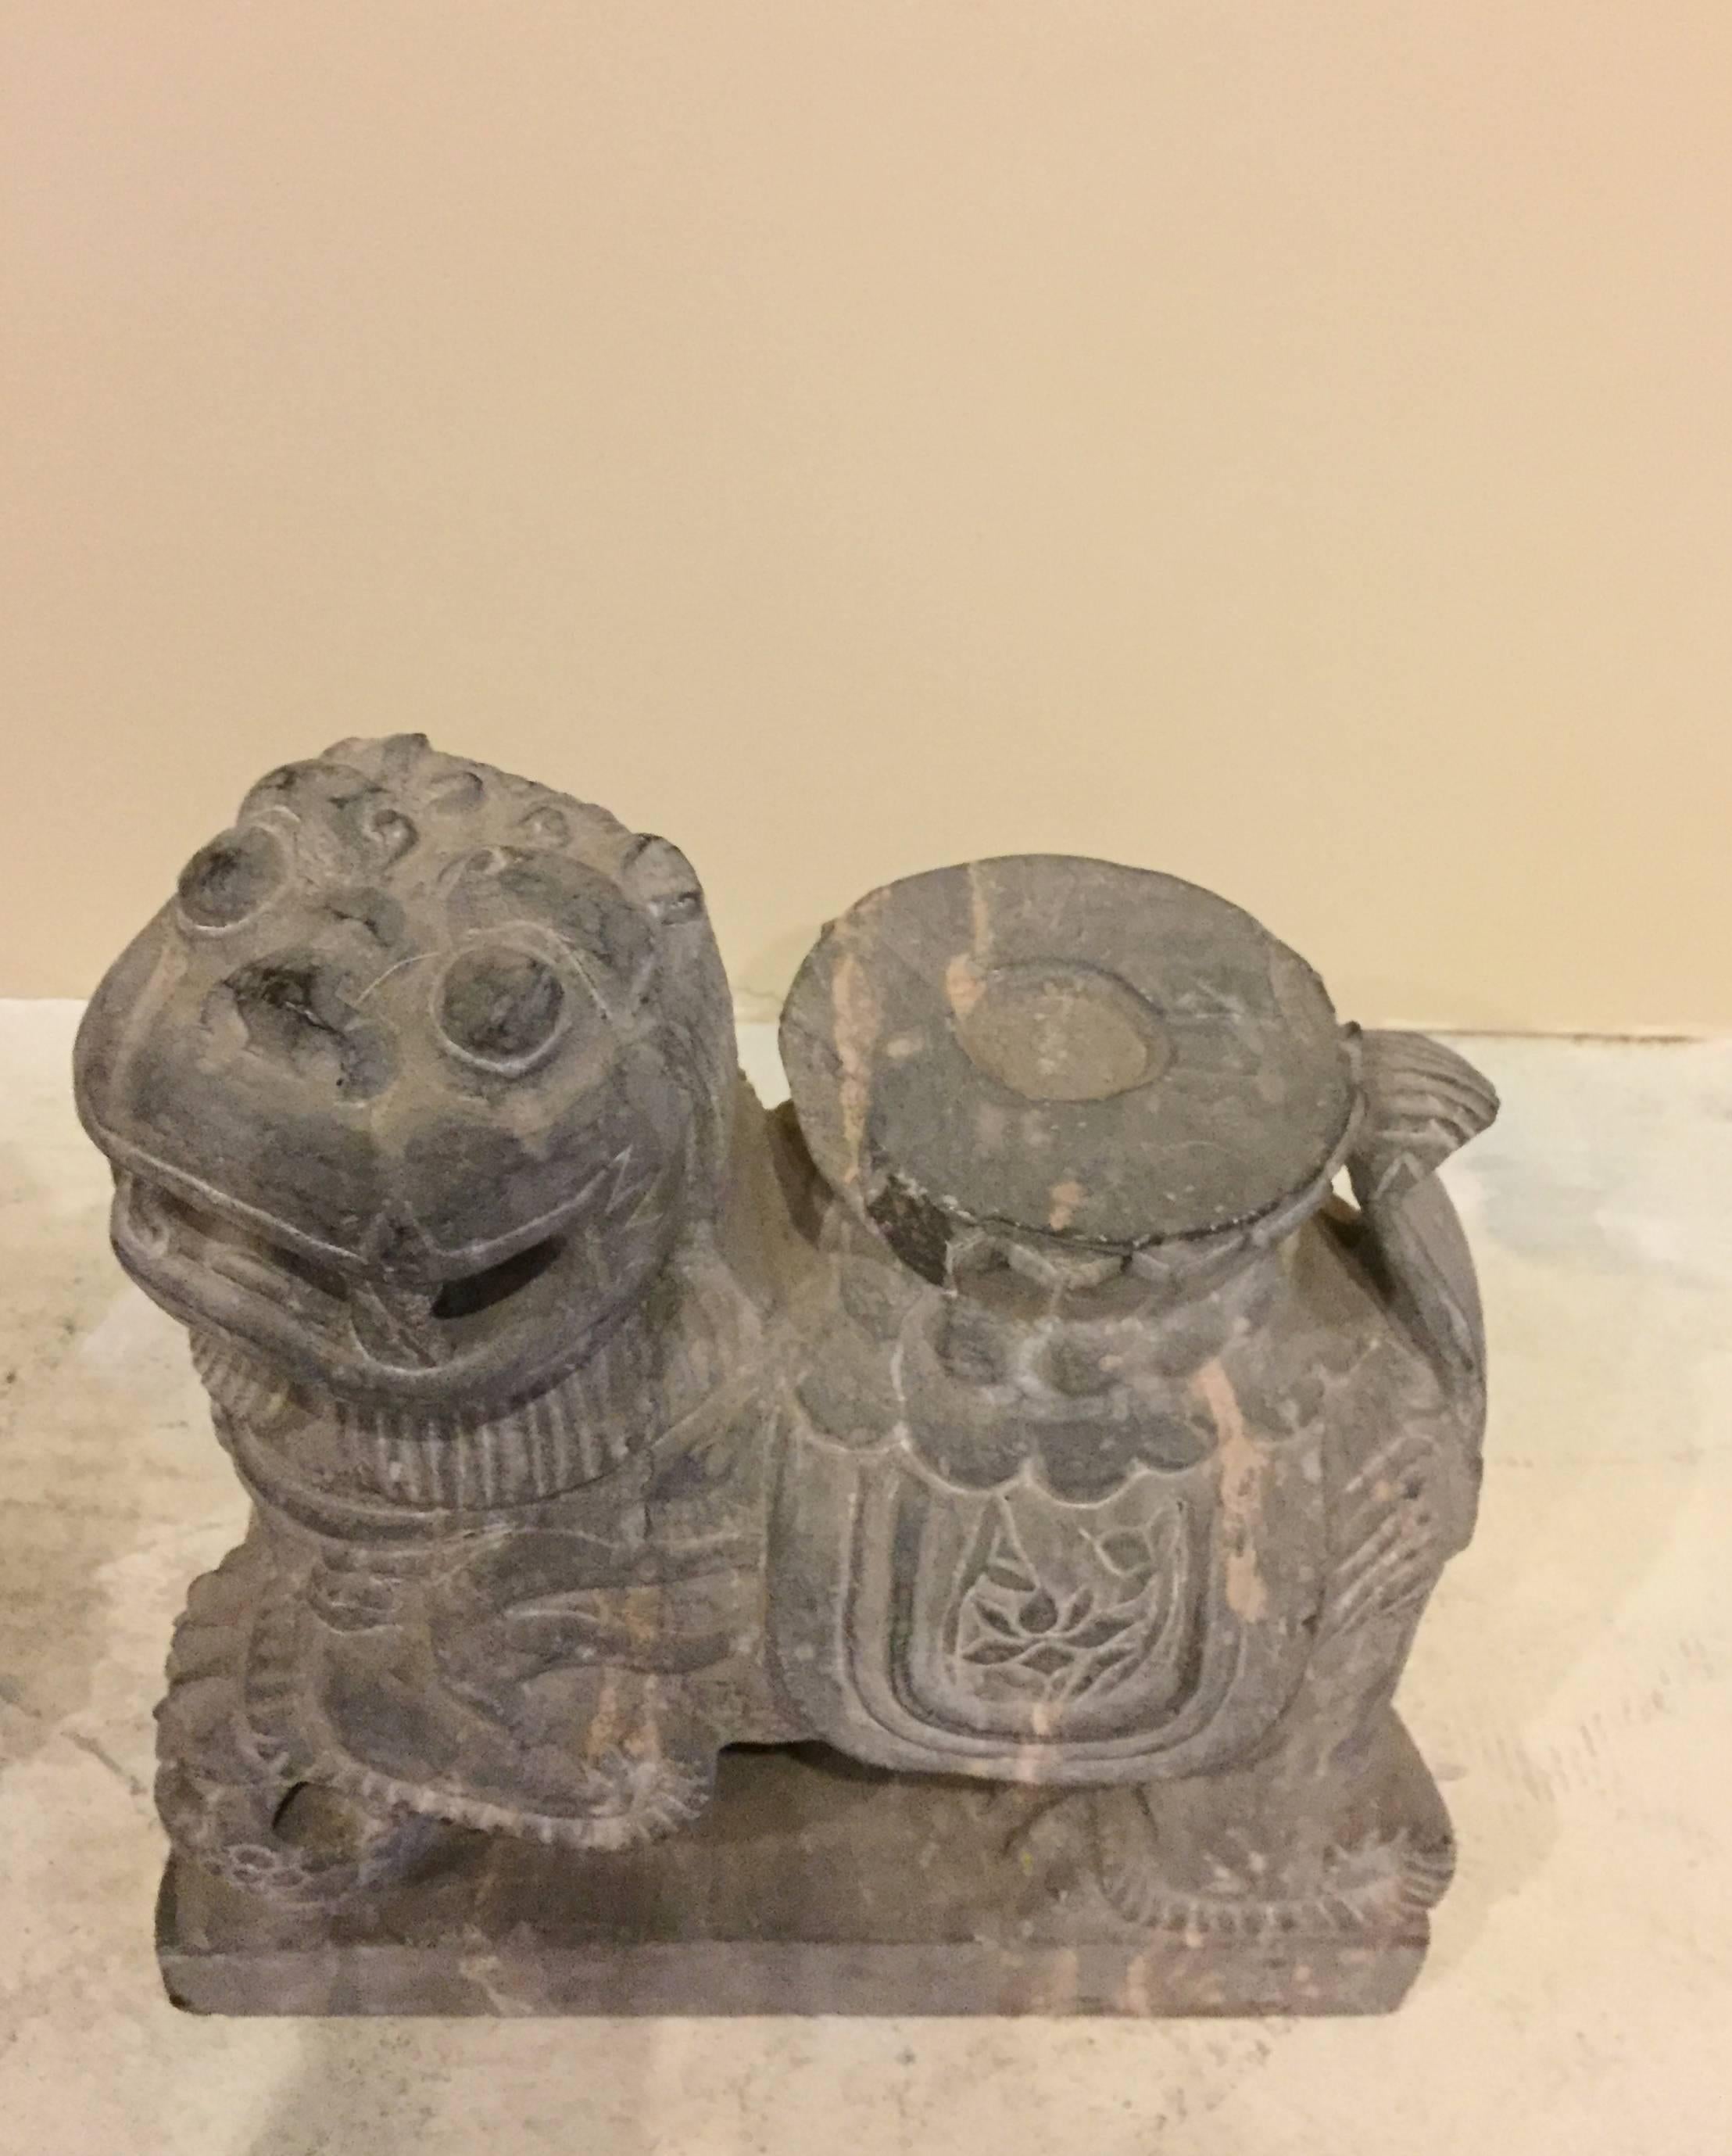 Wonderful pair of foo dogs are hand carved out of solid granite. Details of lotus flowers can be observed on their saddles. A candle holder feature adds to their uniqueness.  These foo dogs have very adorable, happy expressions. Foo dogs are